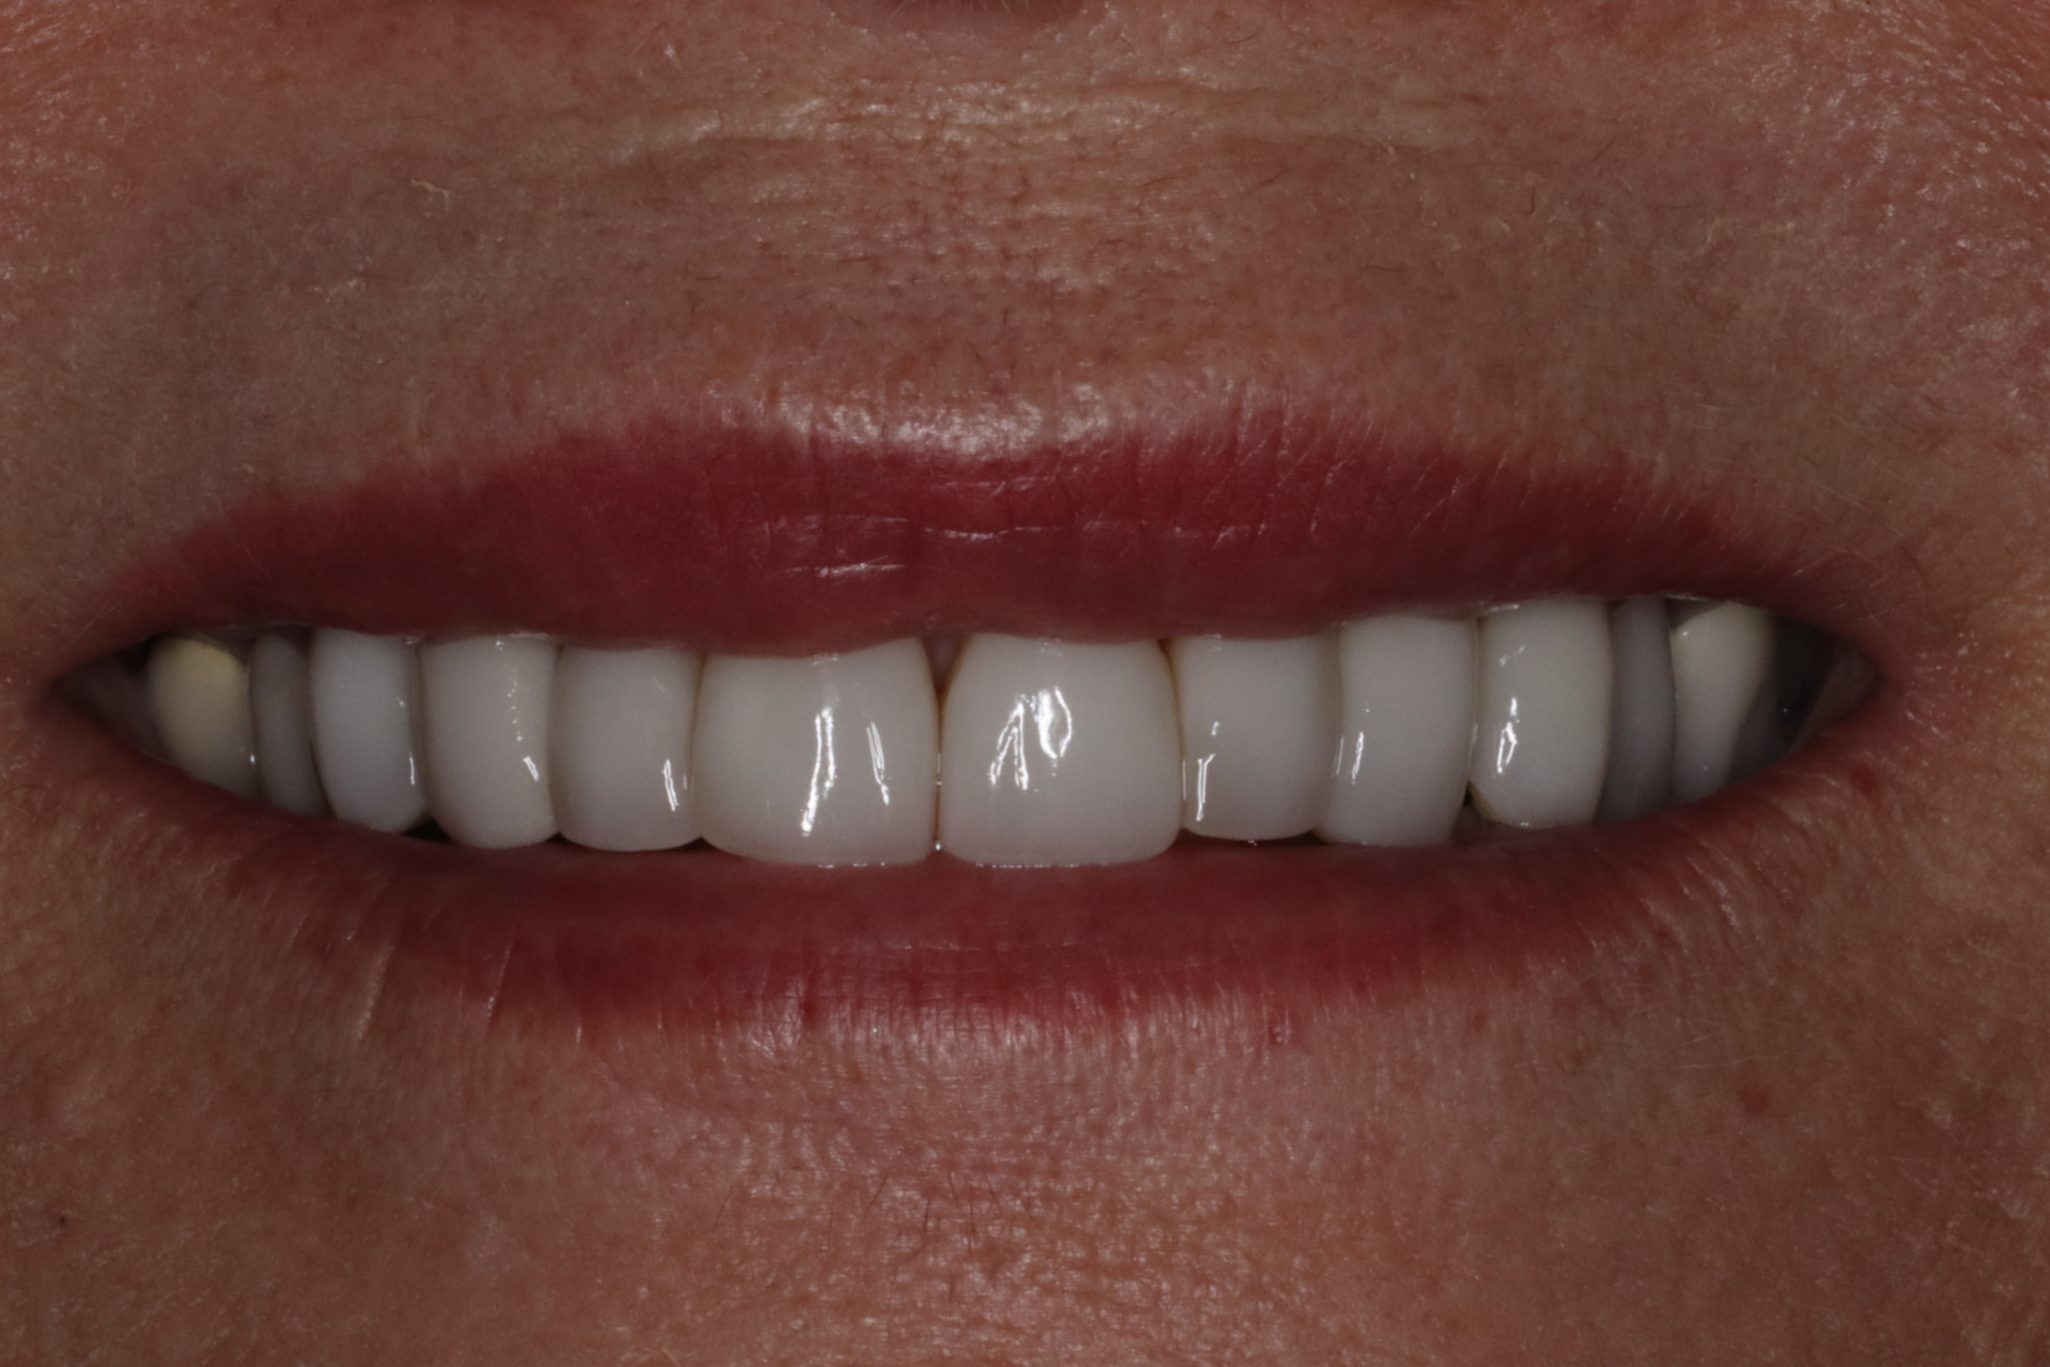 Porcelain Veneers to Change the Size and Shape of the Face and Teeth